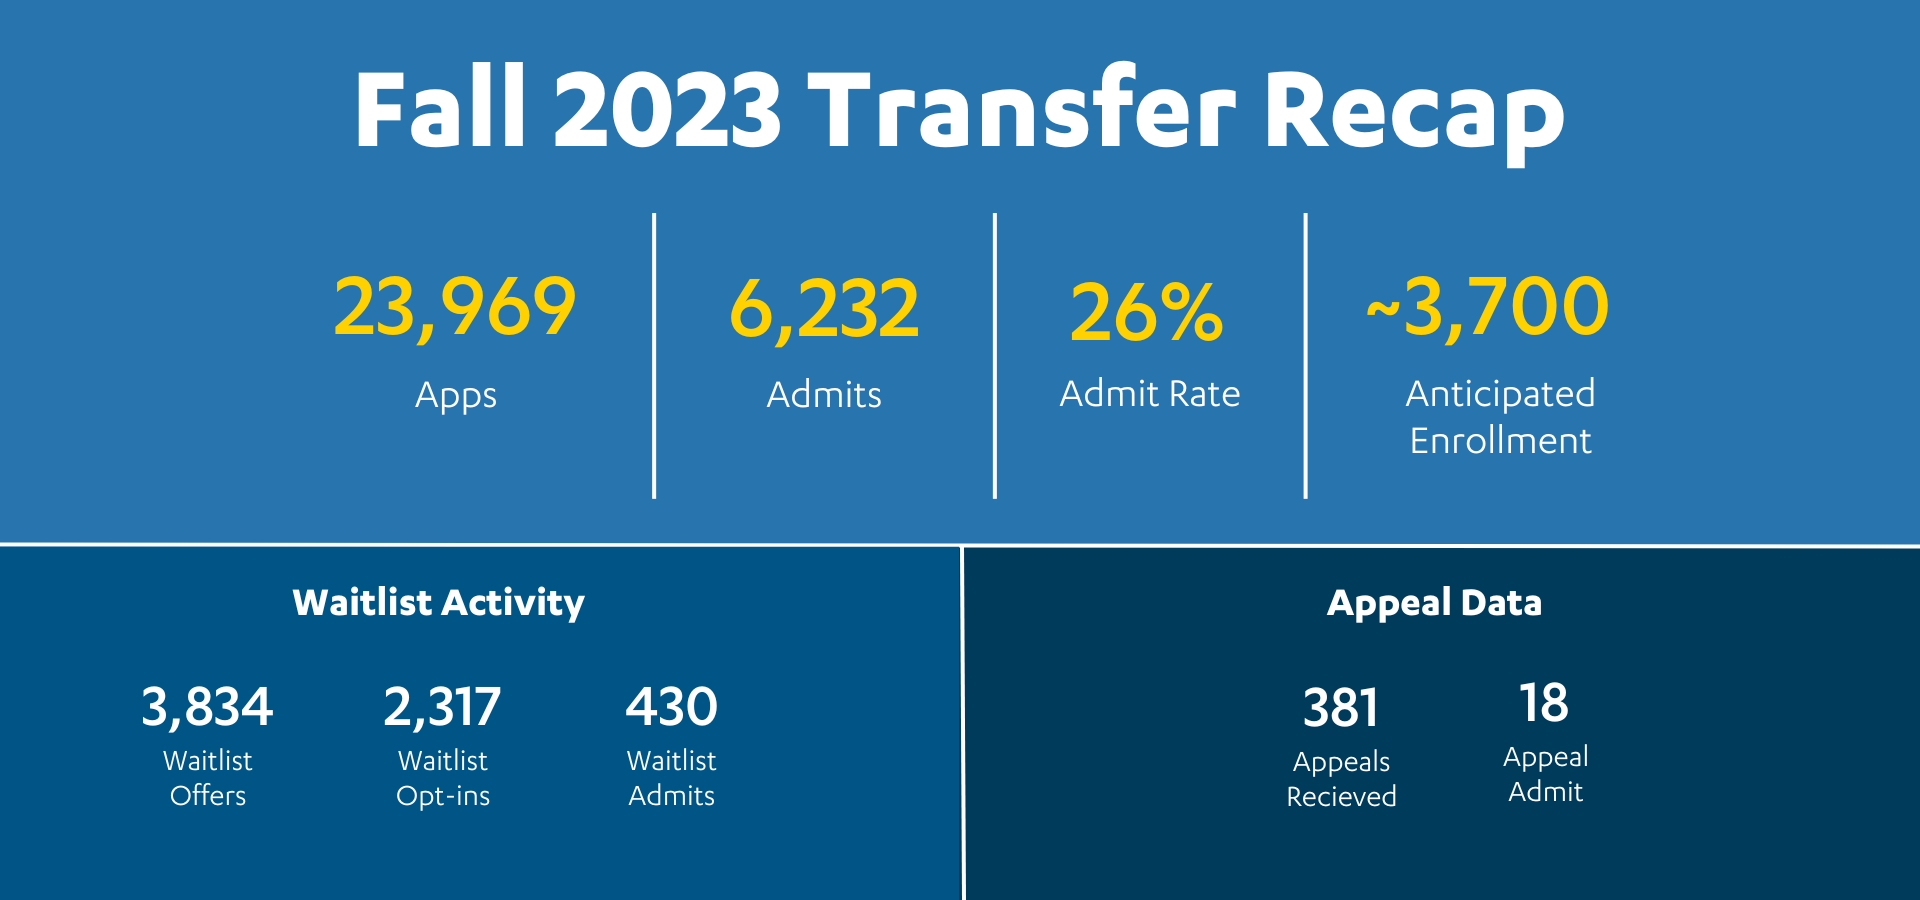 Transfer admission data for fall 2023